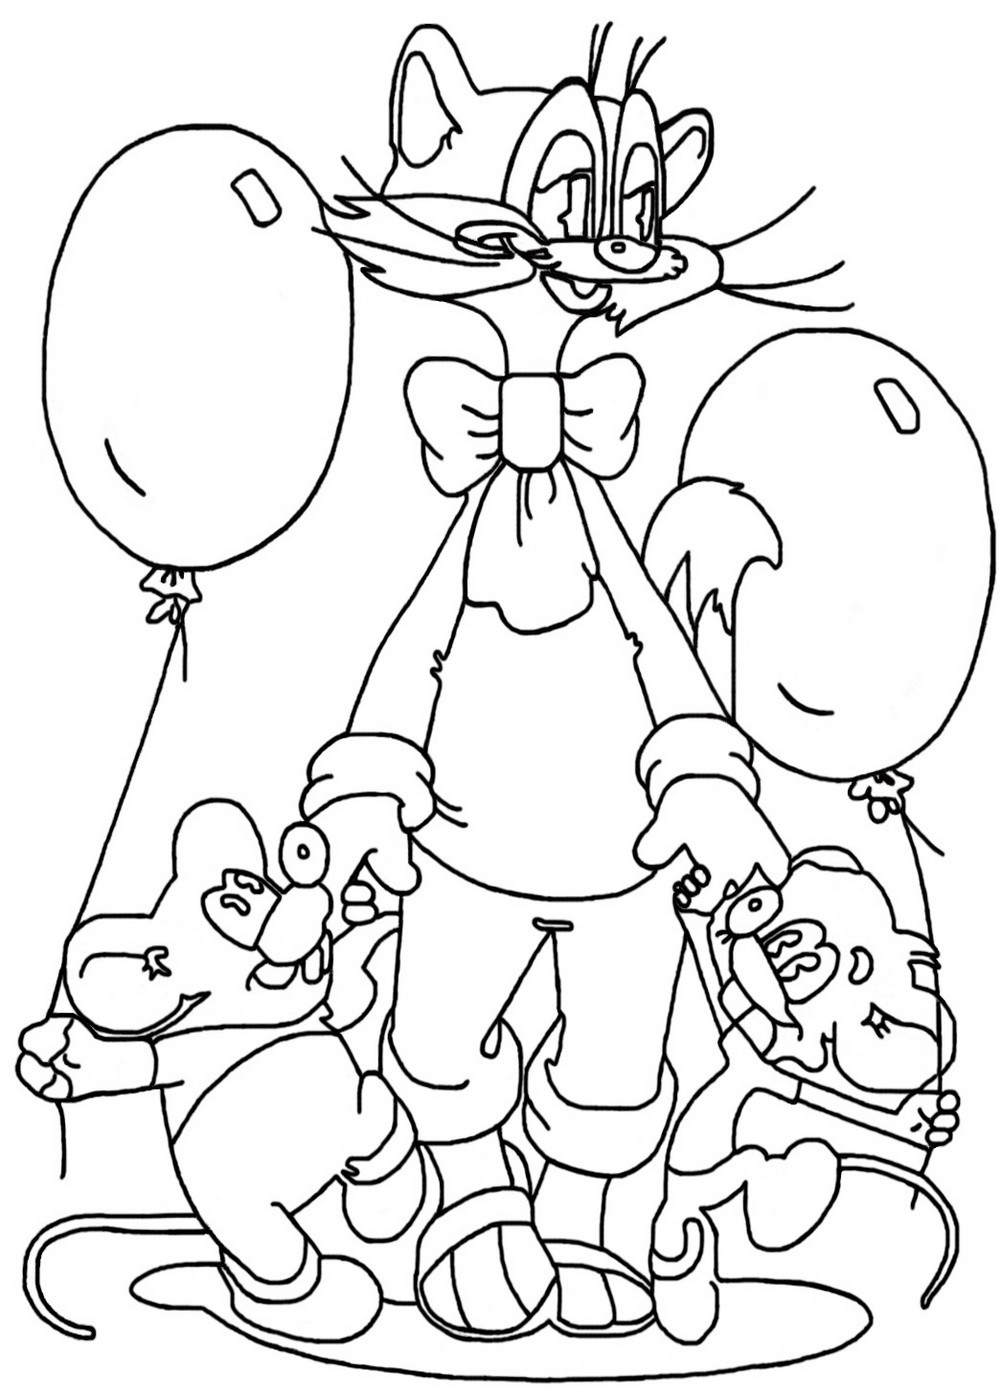 Coloring Sheets For Children
 Balloon coloring pages for kids to print for free